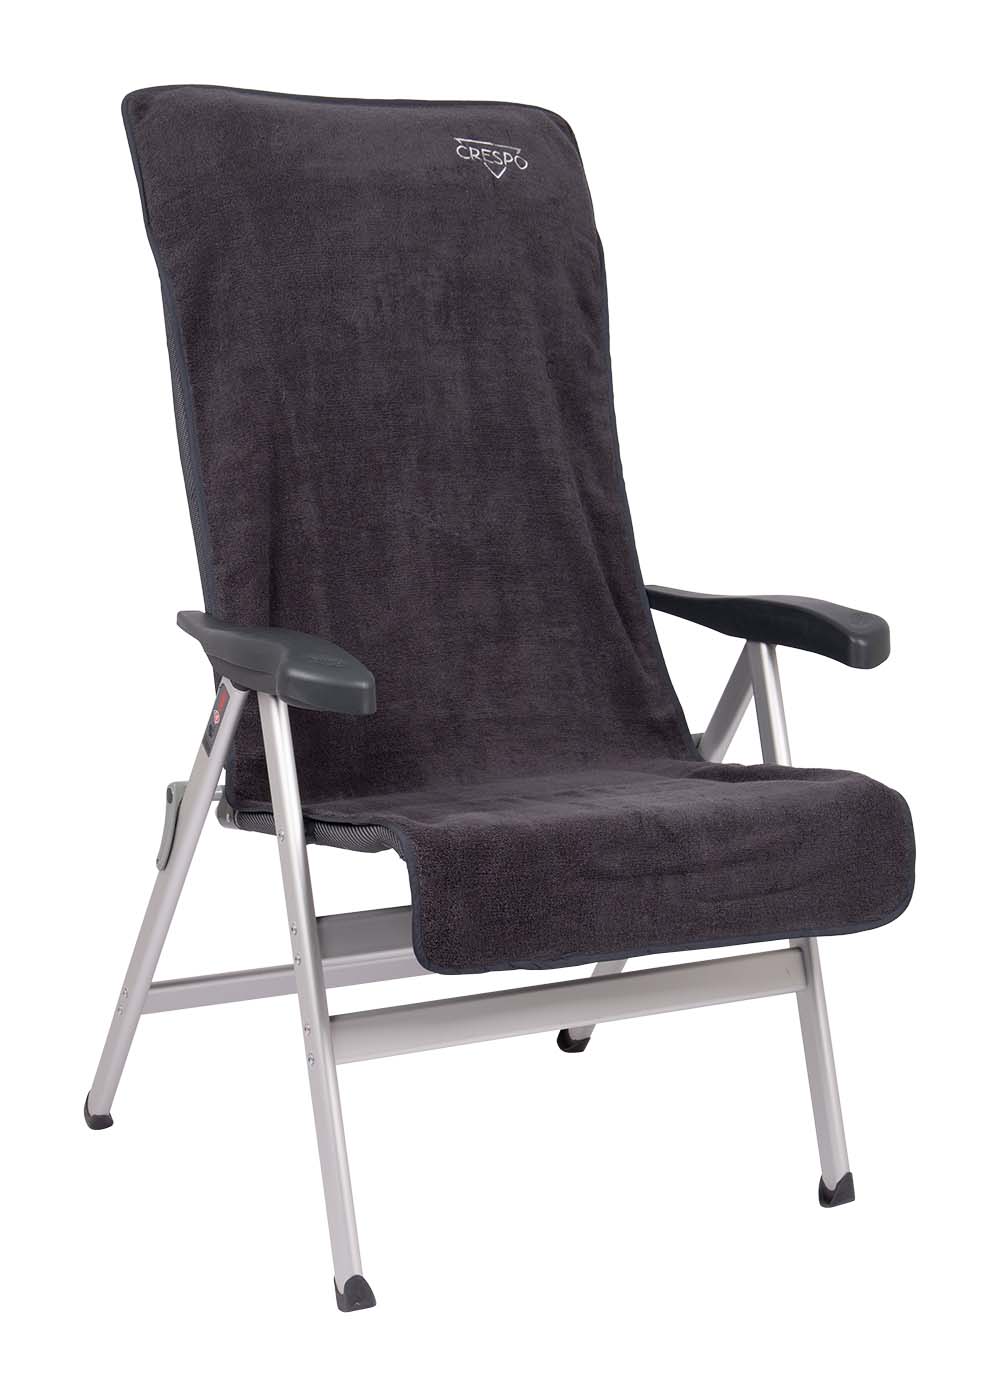 1149900 Crespo - Terry cloth cover M - Chairs - Grey